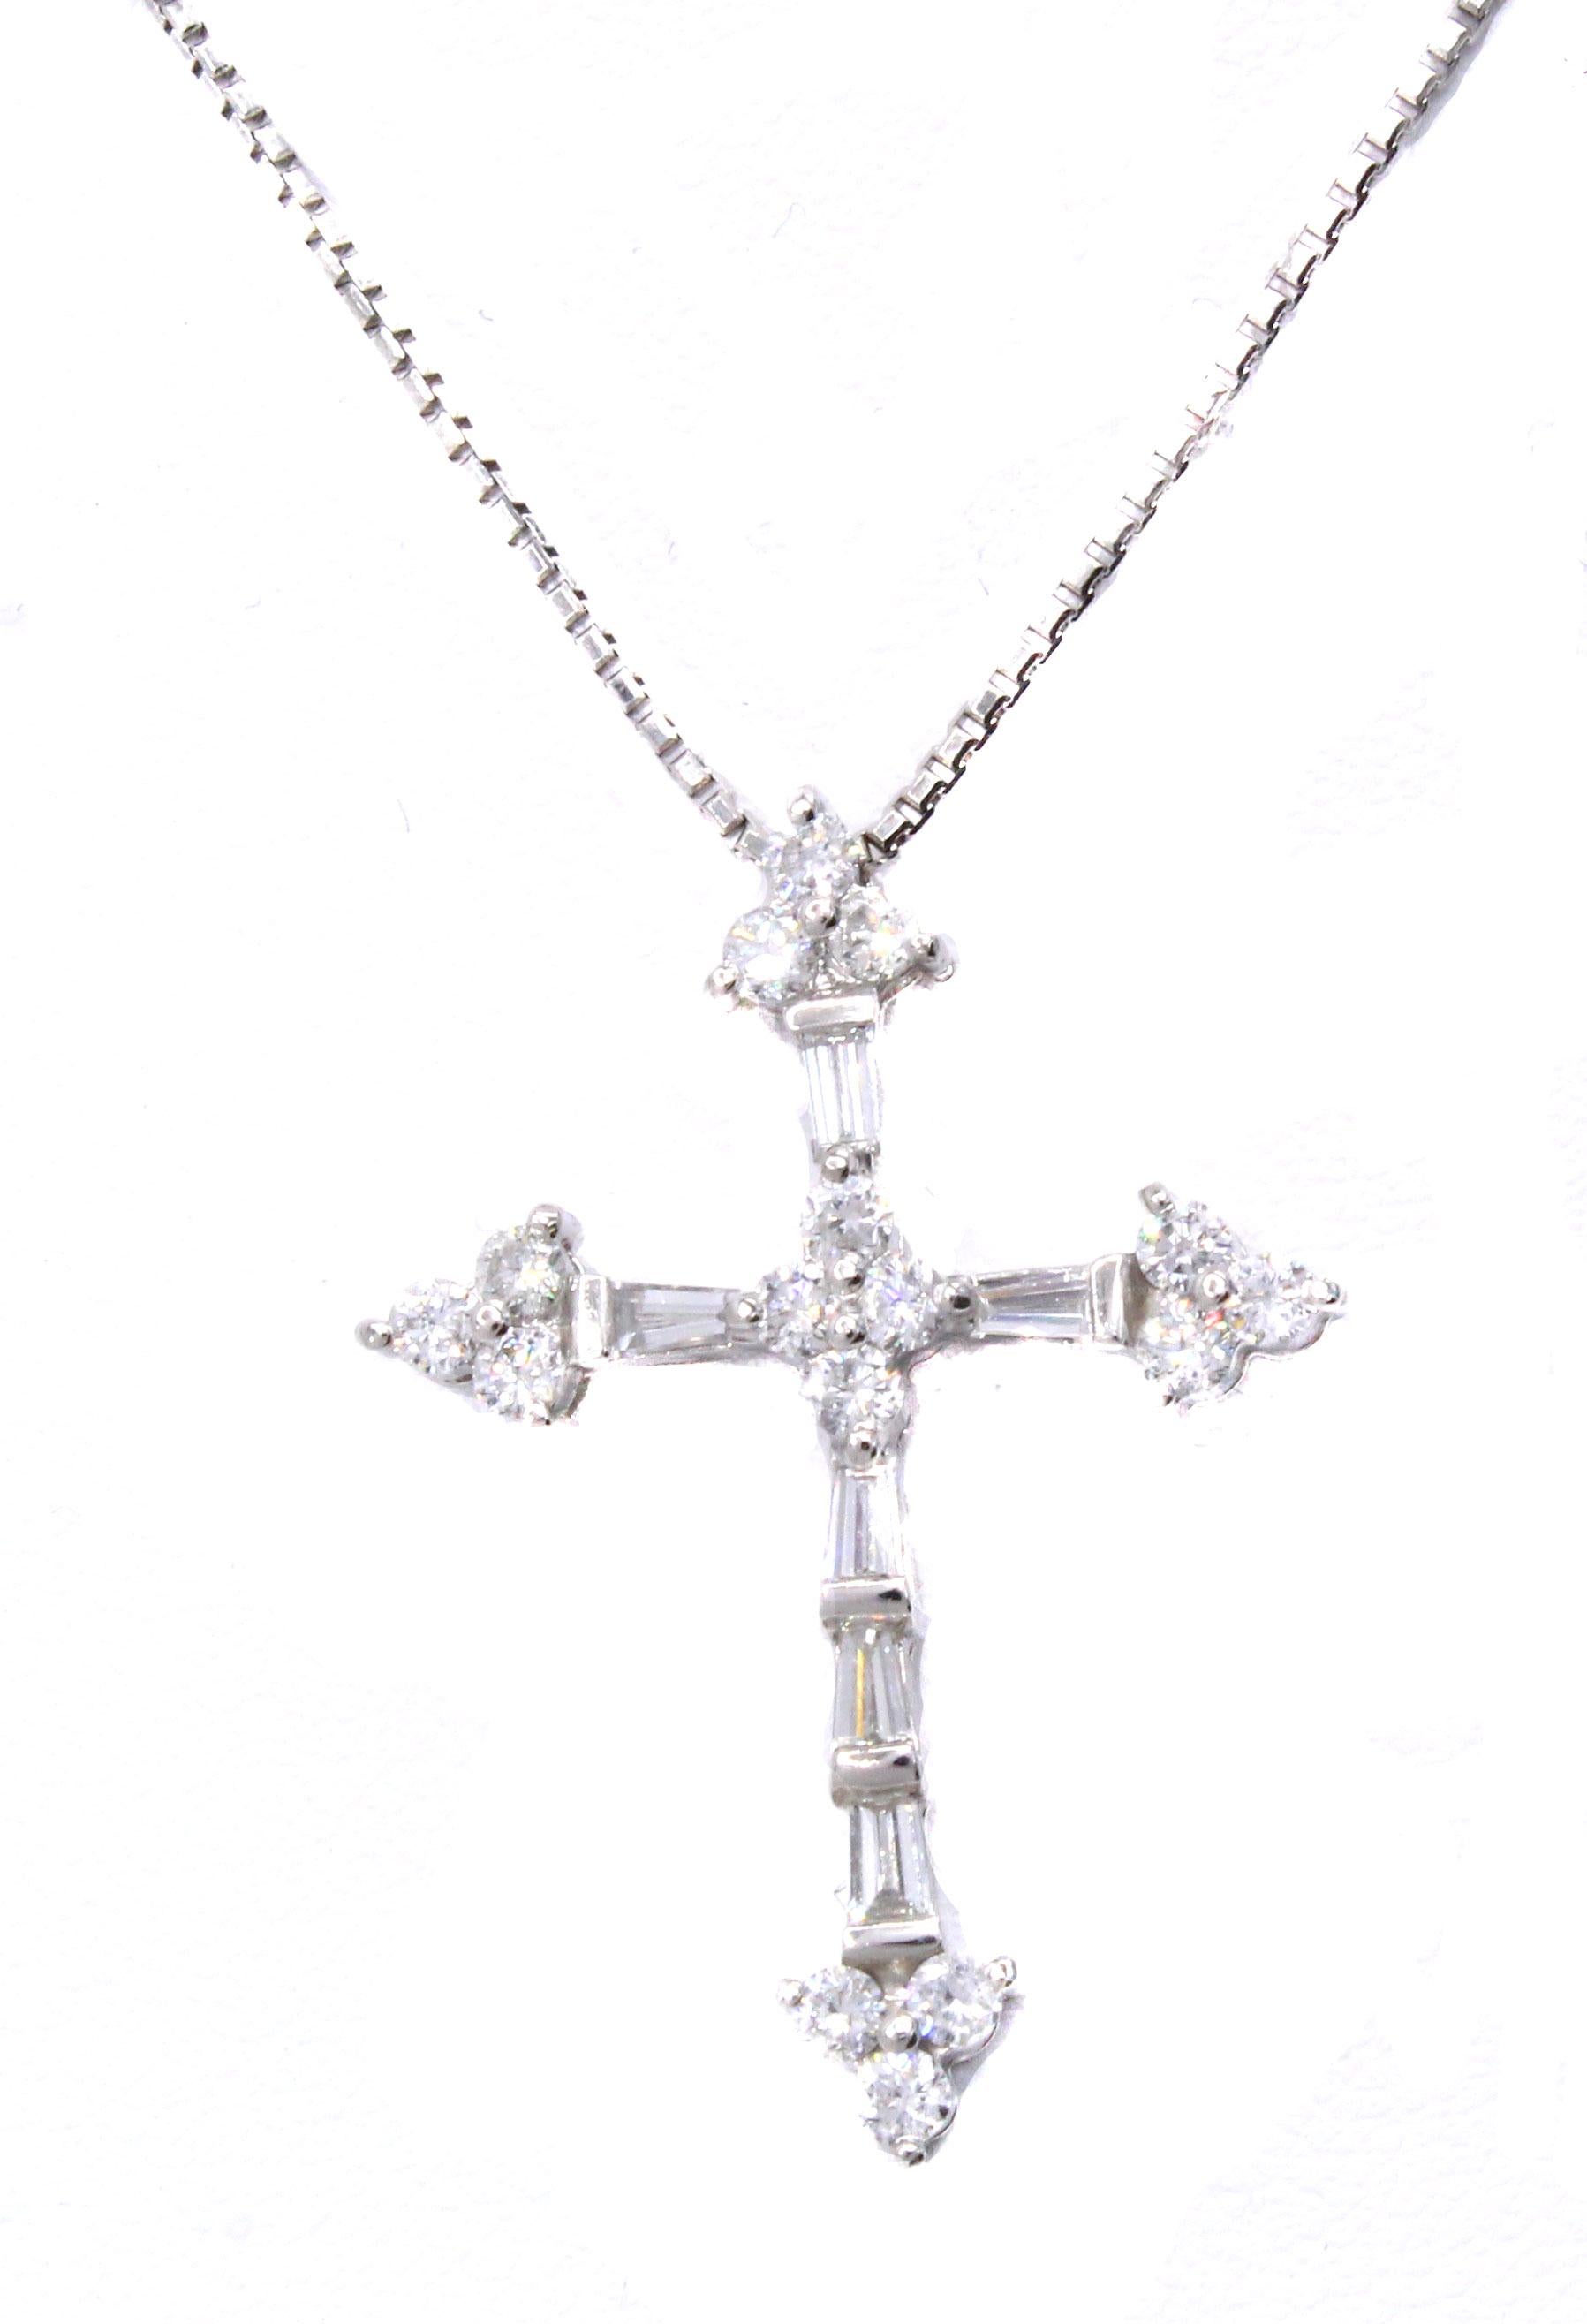 Beautifully designed and masterfully handcrafted this cross is set with 6 tapered baguette and 12 round brilliant cut diamonds with a total weight of 1 carat, which is stamped on the back of the pendant. All diamonds are perfectly matched in color